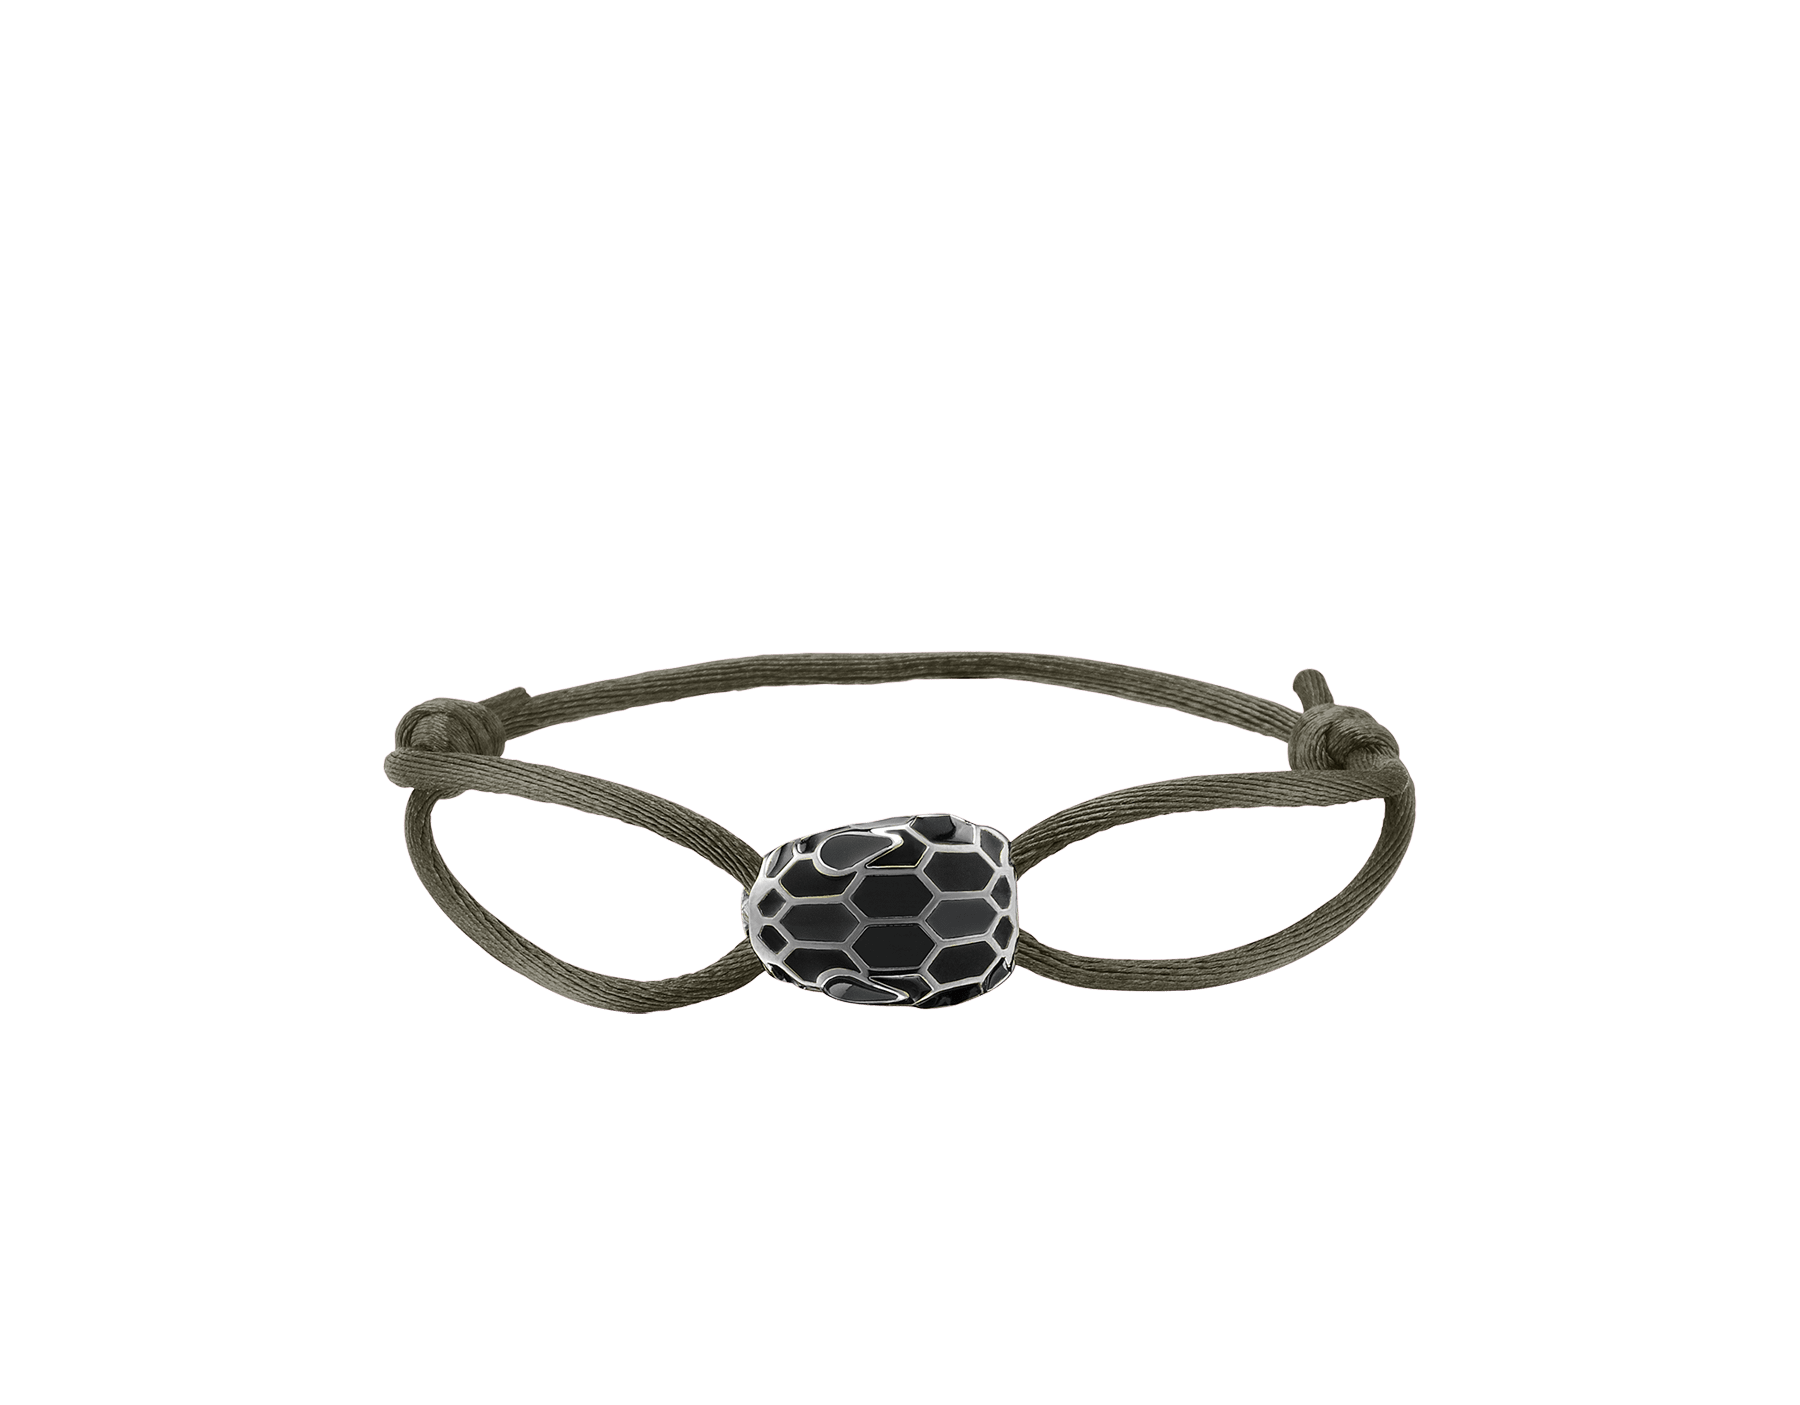 "Serpenti Forever" bracelet in Daisy Topaz yellow fabric with a light gold-plated brass tempting snakehead décor enamelled in Daisy Topaz yellow and black, with seductive black enamel eyes. SERP-STRINGb image 1